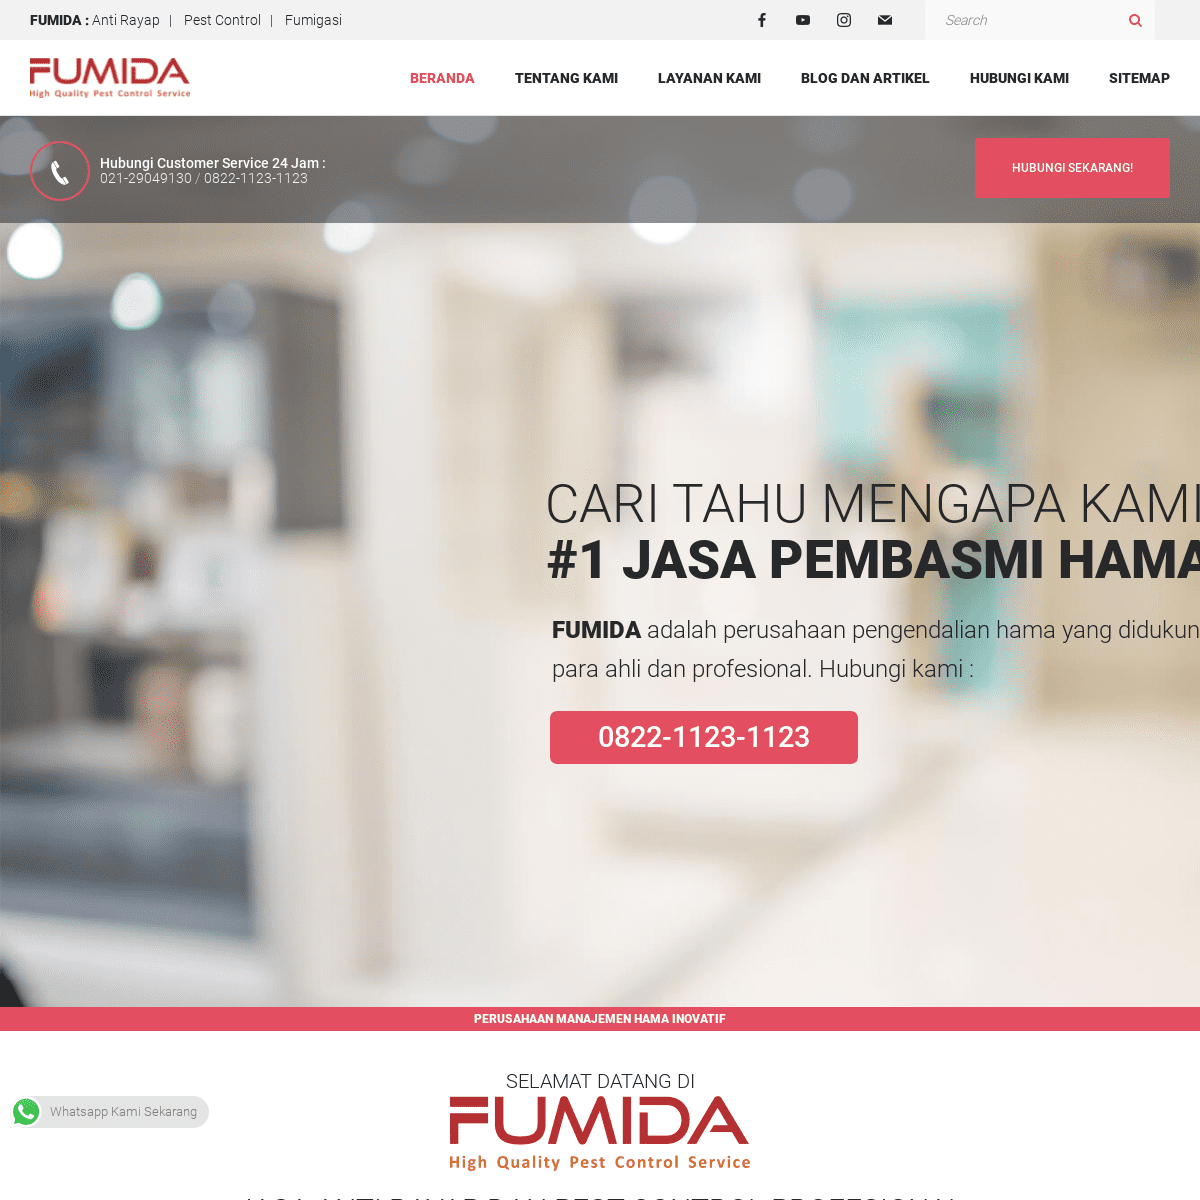 A complete backup of https://fumida.co.id